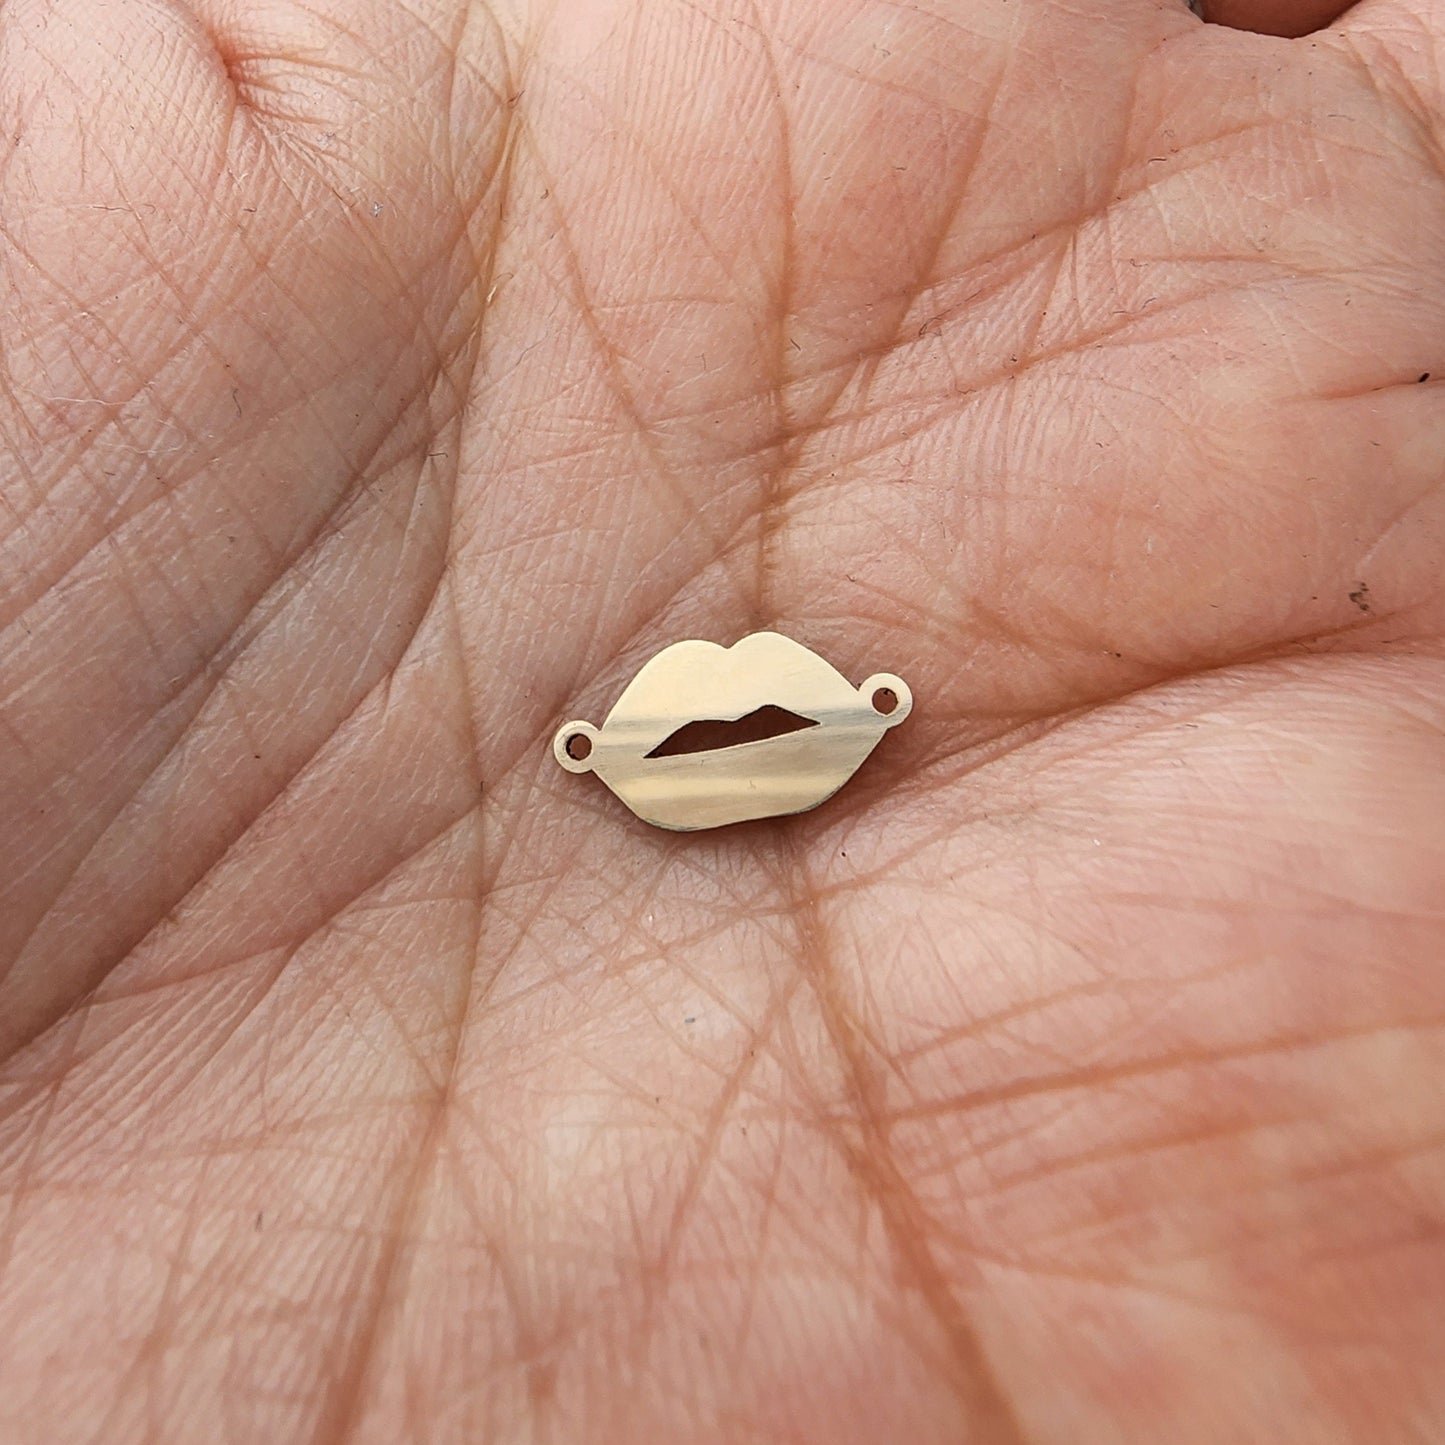 gold filled lips connector - sterling silver or solid gold- permanent jewelry word connectors- charm, pendant, mouth 10 mm tall, Taylor lips